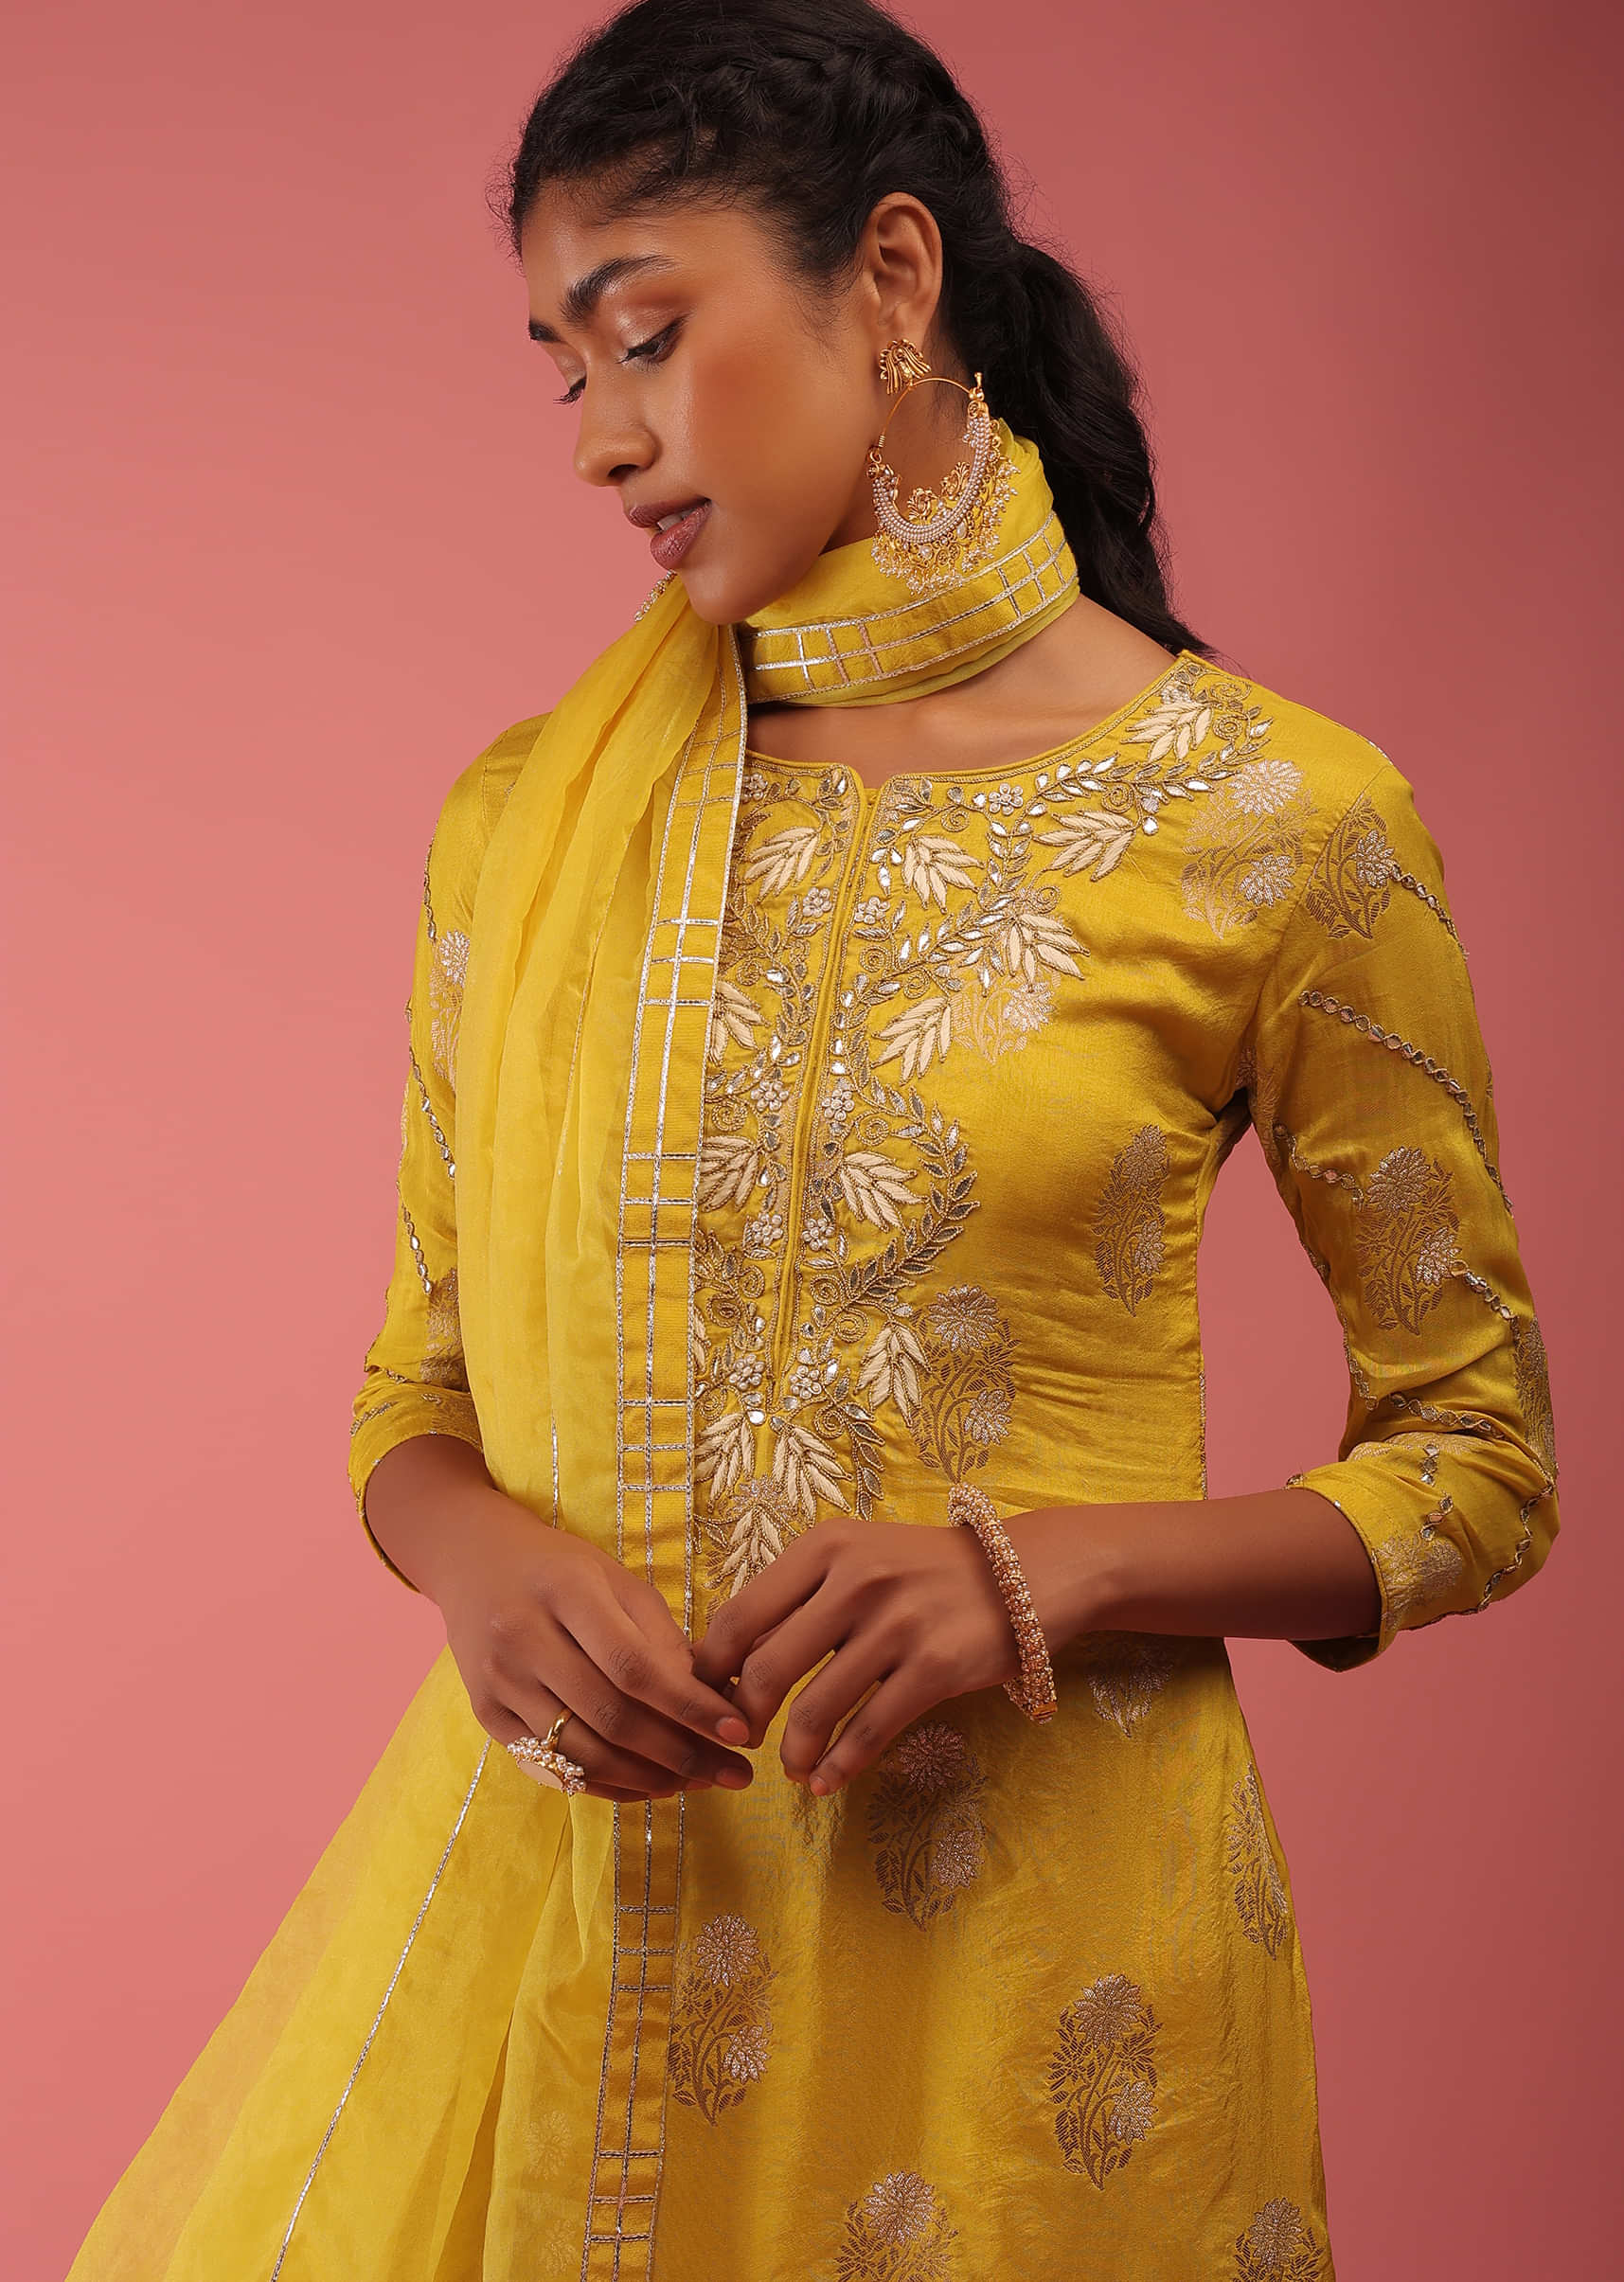 Freesia Yellow Sharara Suit In Golden Zari Embroidery, Crafted In Organza With Embroidery 3/4Th Sleeves